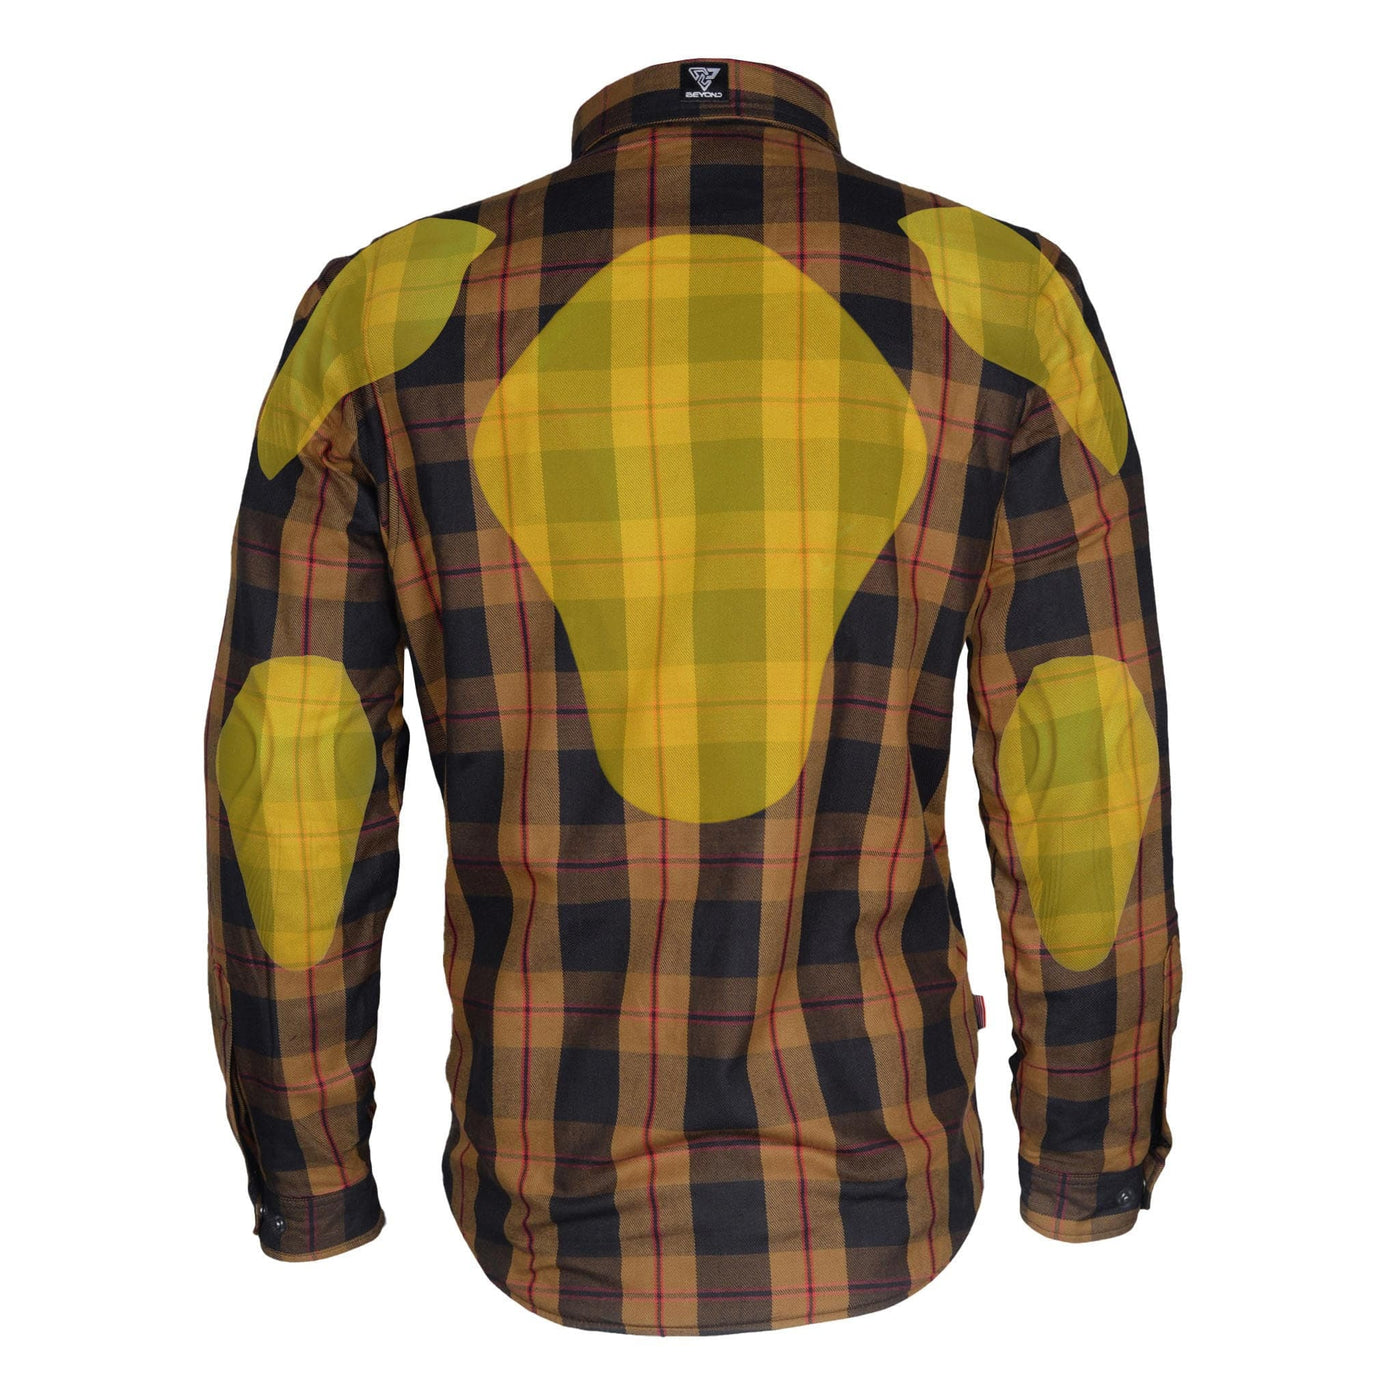 Protective Flannel Shirt with Pads "Wild West" - Brown, Black, Red